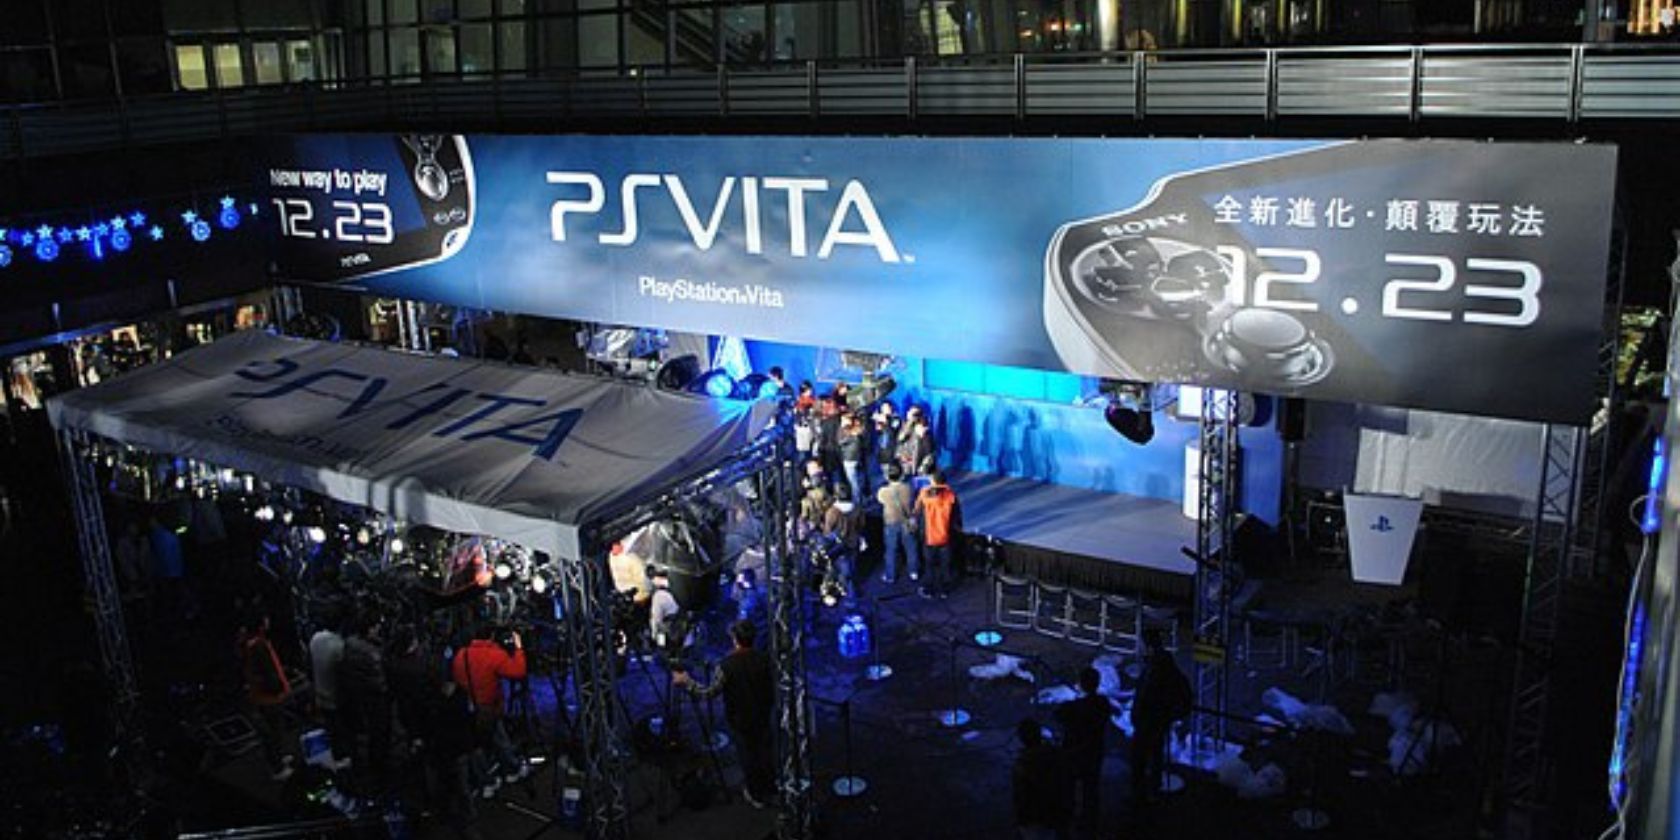 Image taken from the launch of the PS Vita